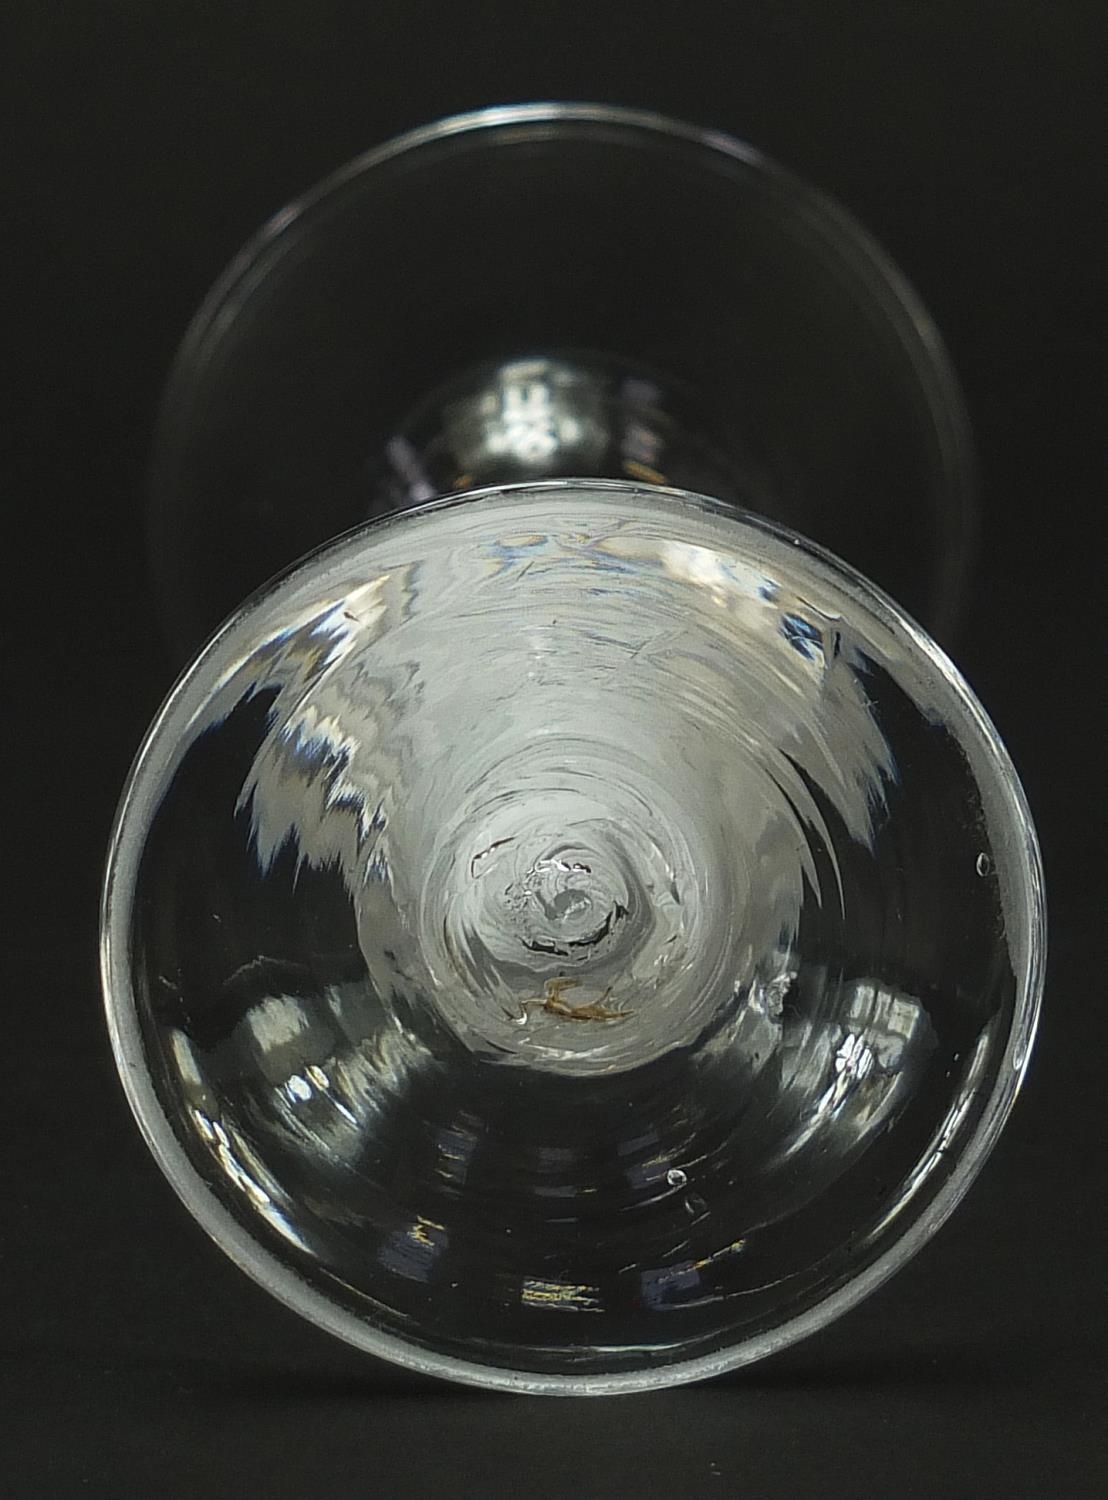 18th century wine glass having knopped stem with multiple opaque twists, 15.5cm high - Image 3 of 3